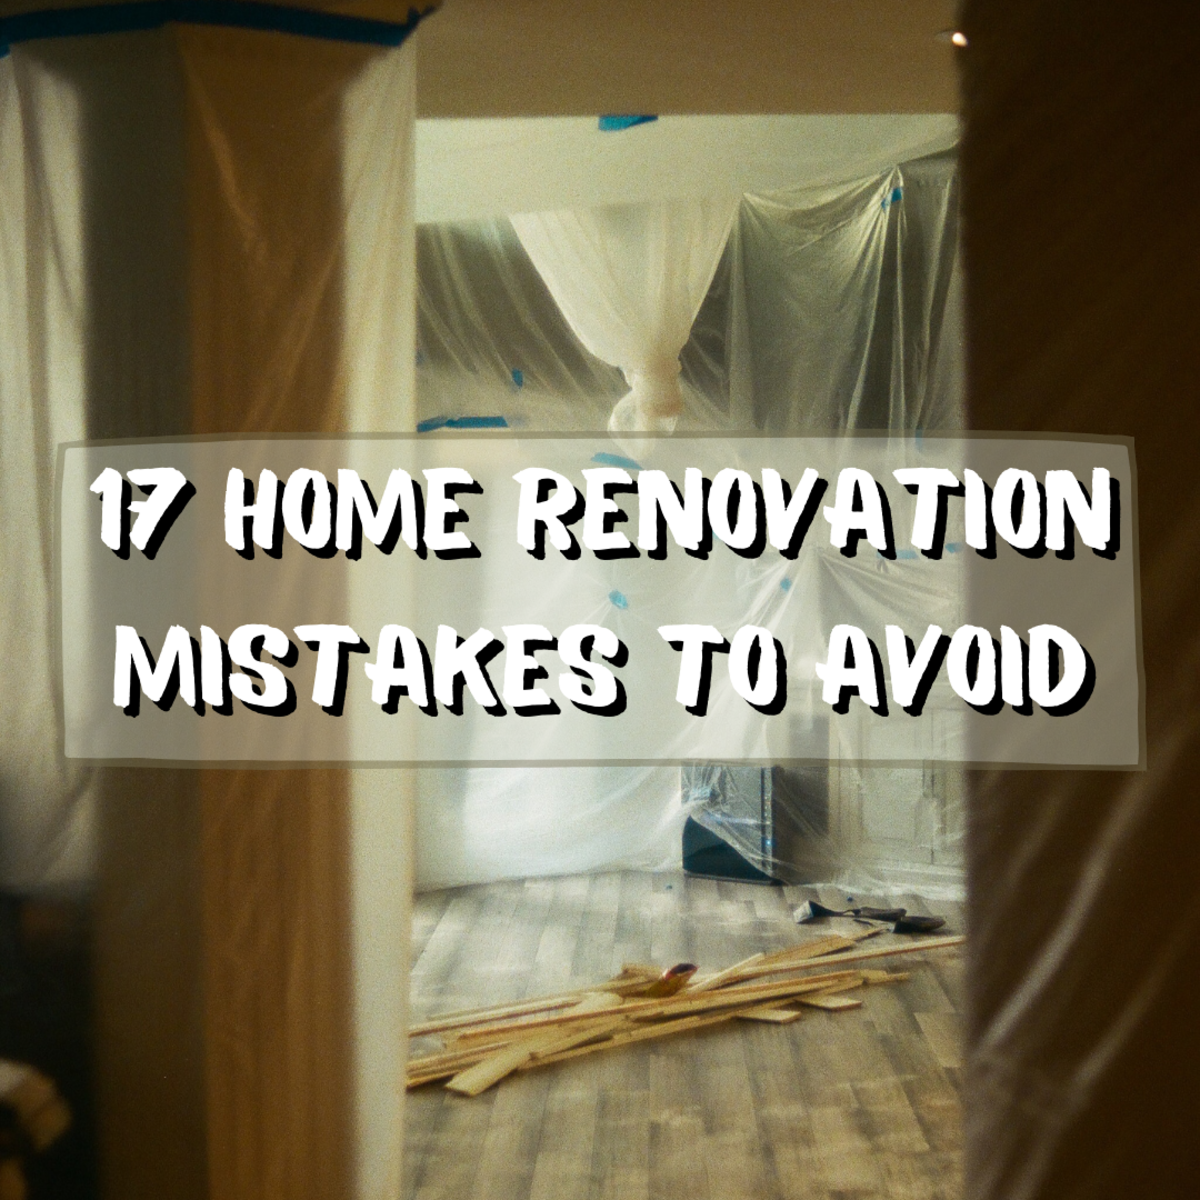 Read on to learn 17 home renovation mistakes that are important to avoid.